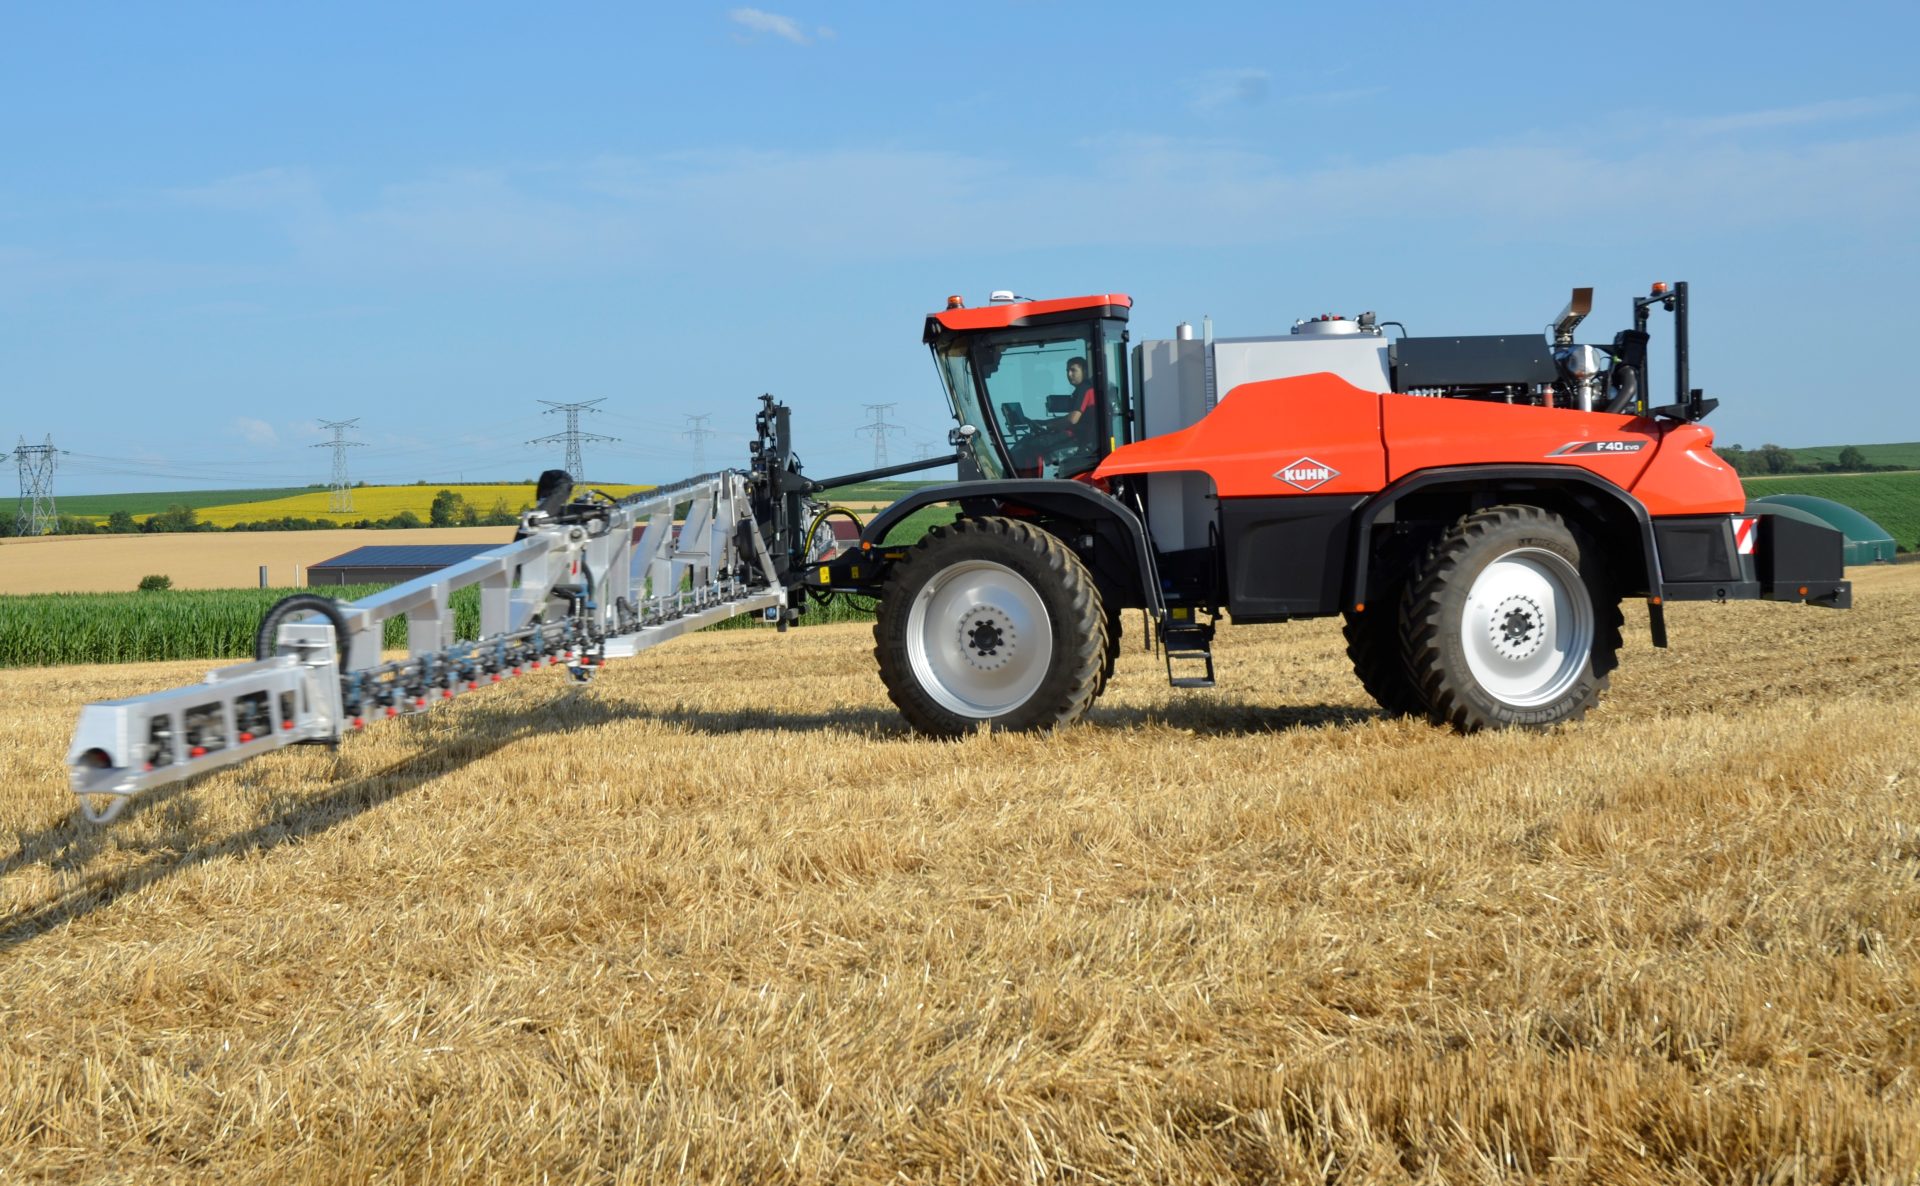 First self-propelled Kuhn sprayer in Europe